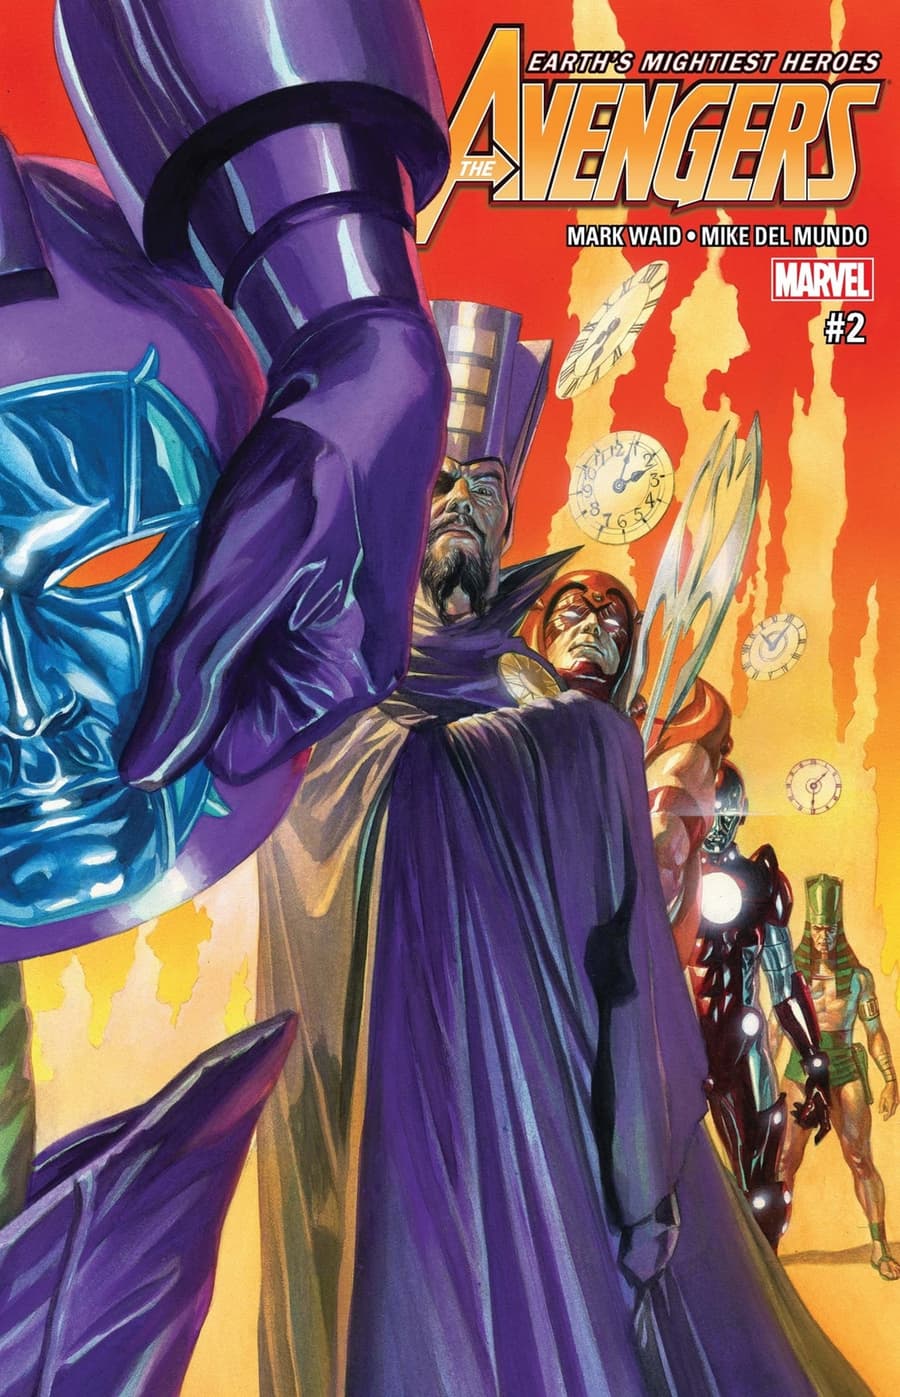 AVENGERS (2016) #2 cover by Alex Ross